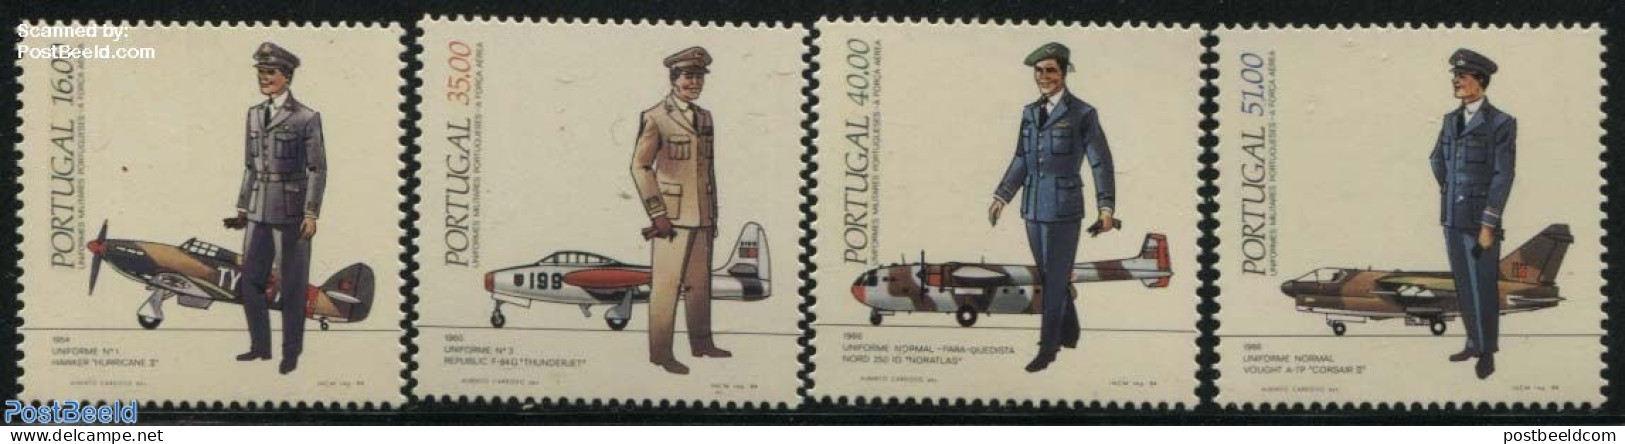 Portugal 1984 Uniforms & Aeroplanes 4v, Mint NH, Transport - Various - Aircraft & Aviation - Uniforms - Unused Stamps